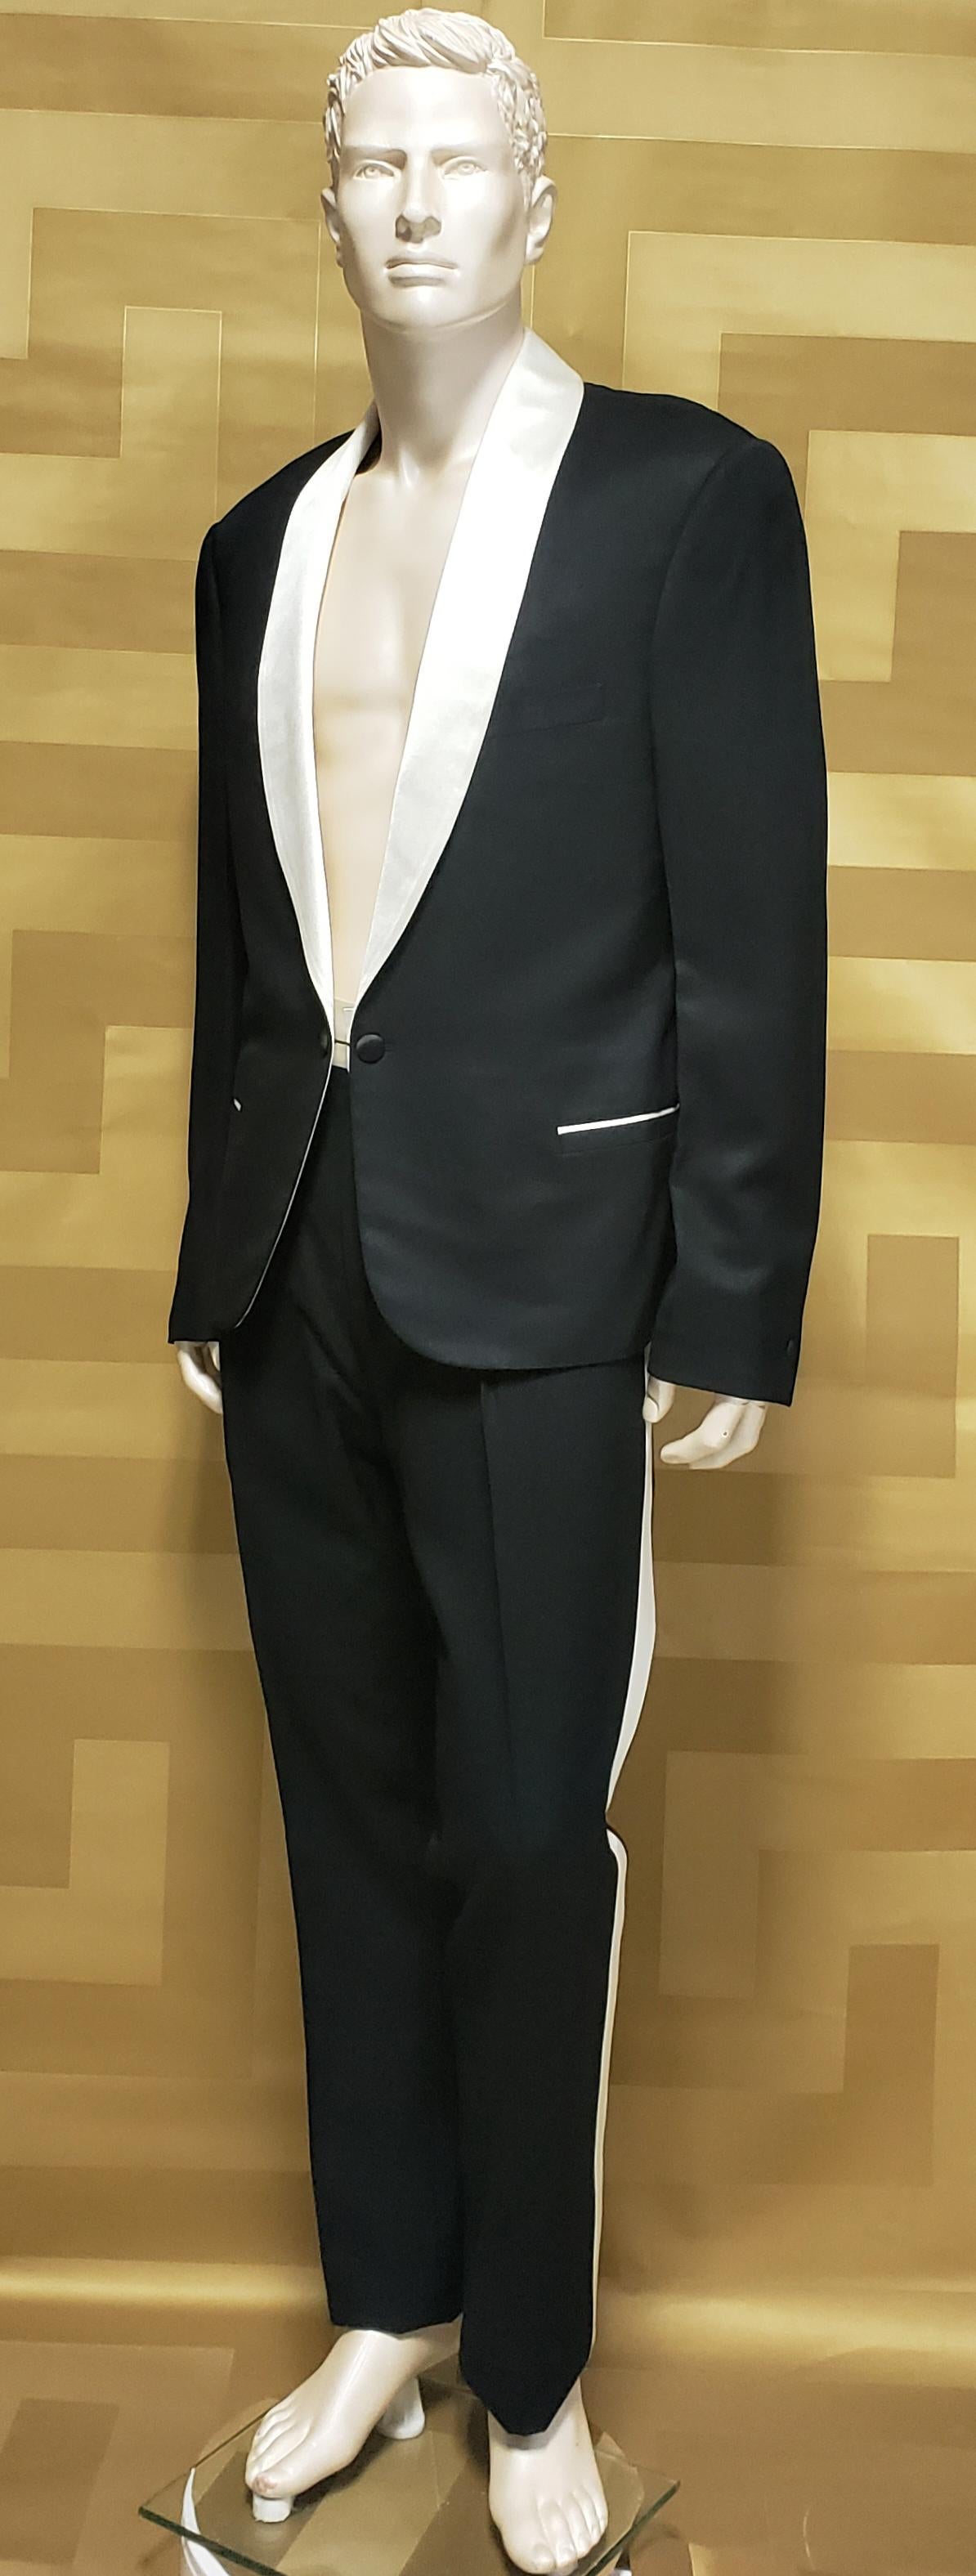  VERSACE 

Black tuxedo suit  
Optic white silk collar and waist. 
The pockets are also trimmed with optic white silk.

IT Size 50 -  US 40 (L)



Measurements:
Jacket:
shoulder to shoulder 20